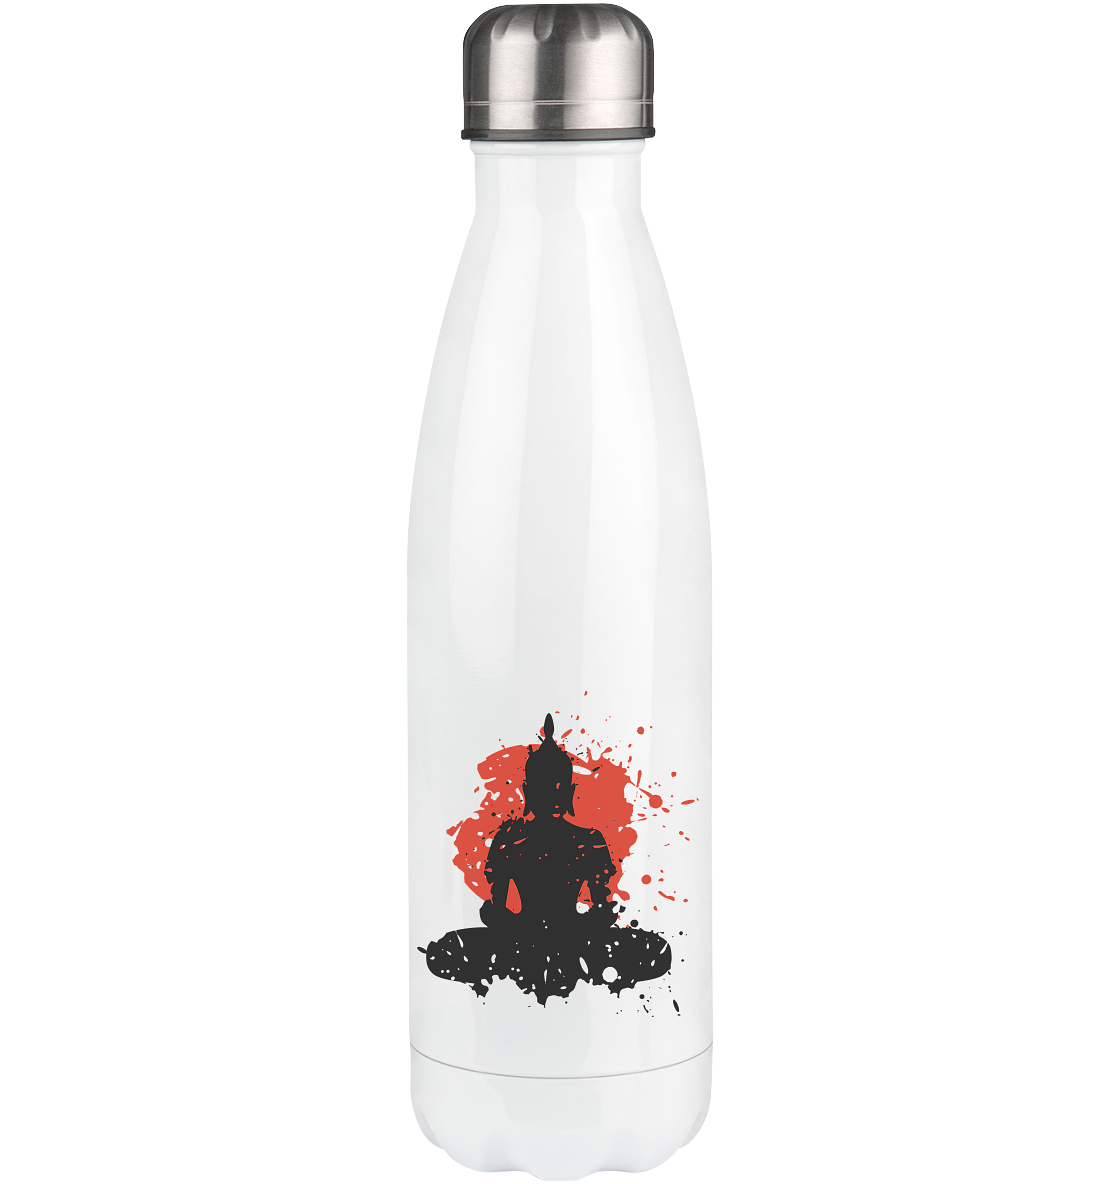 Om Mani Padme Hum Mantra | Thermoflasche 500ml